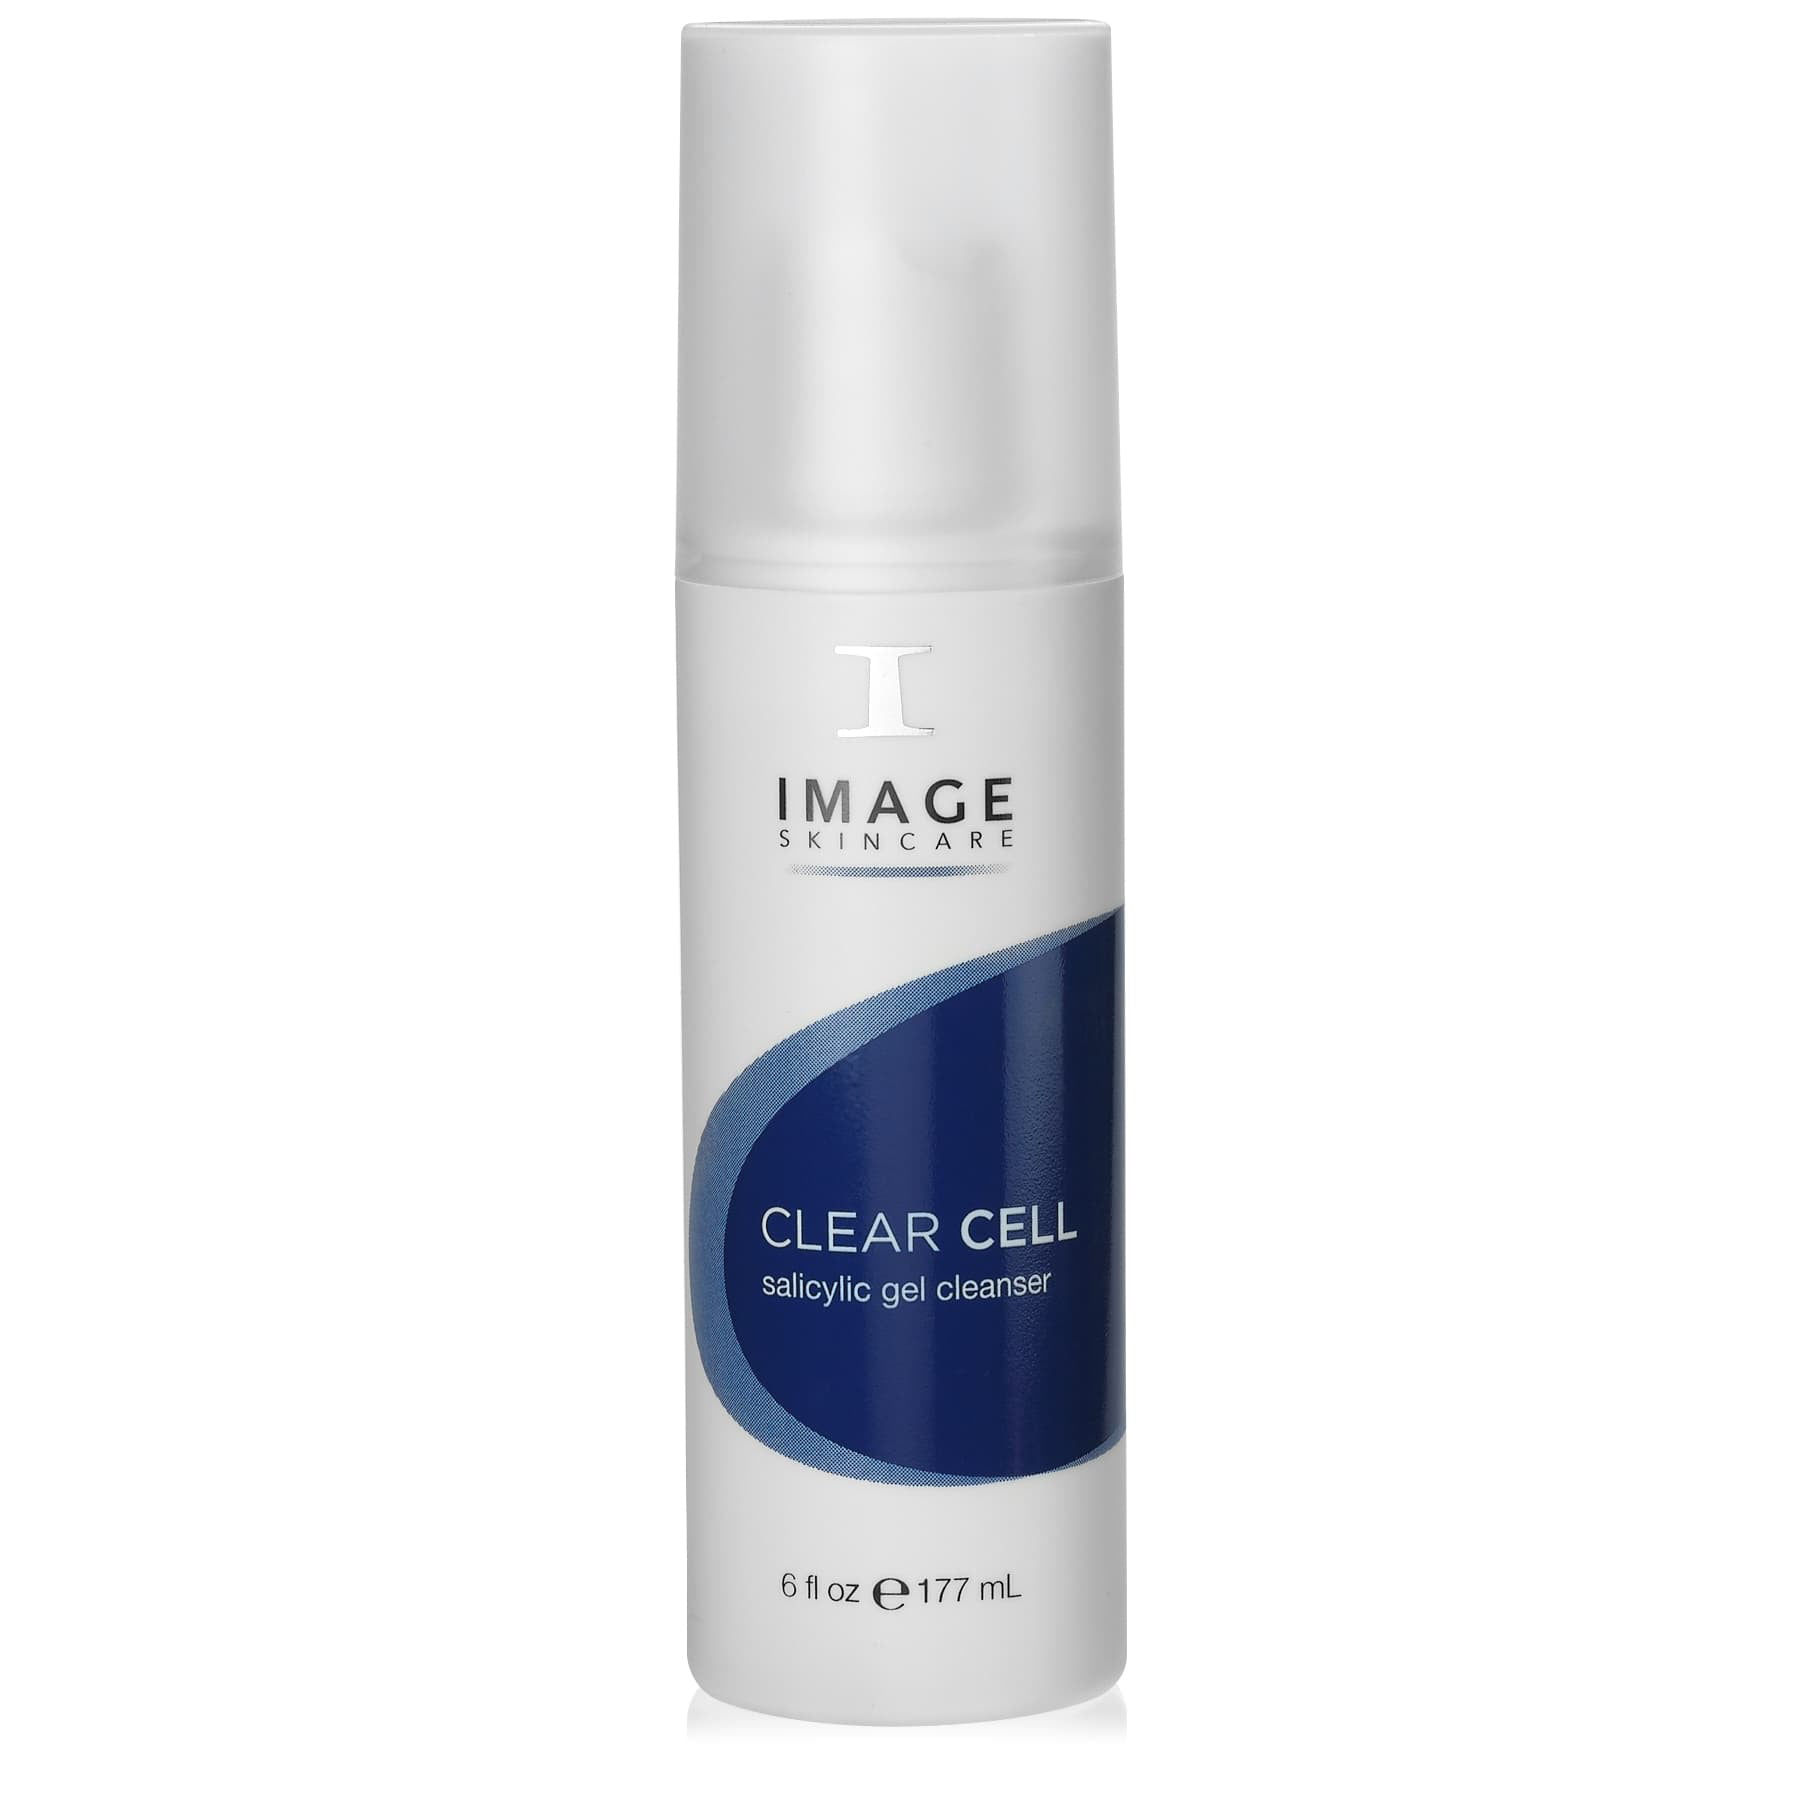 Clear Cell Medicated acne Lotion. Эмульсия Clear Cell. Image Clear Cell очищающий салициловый гель 177мл. Пенка для умывания image Skincare. Clear cell